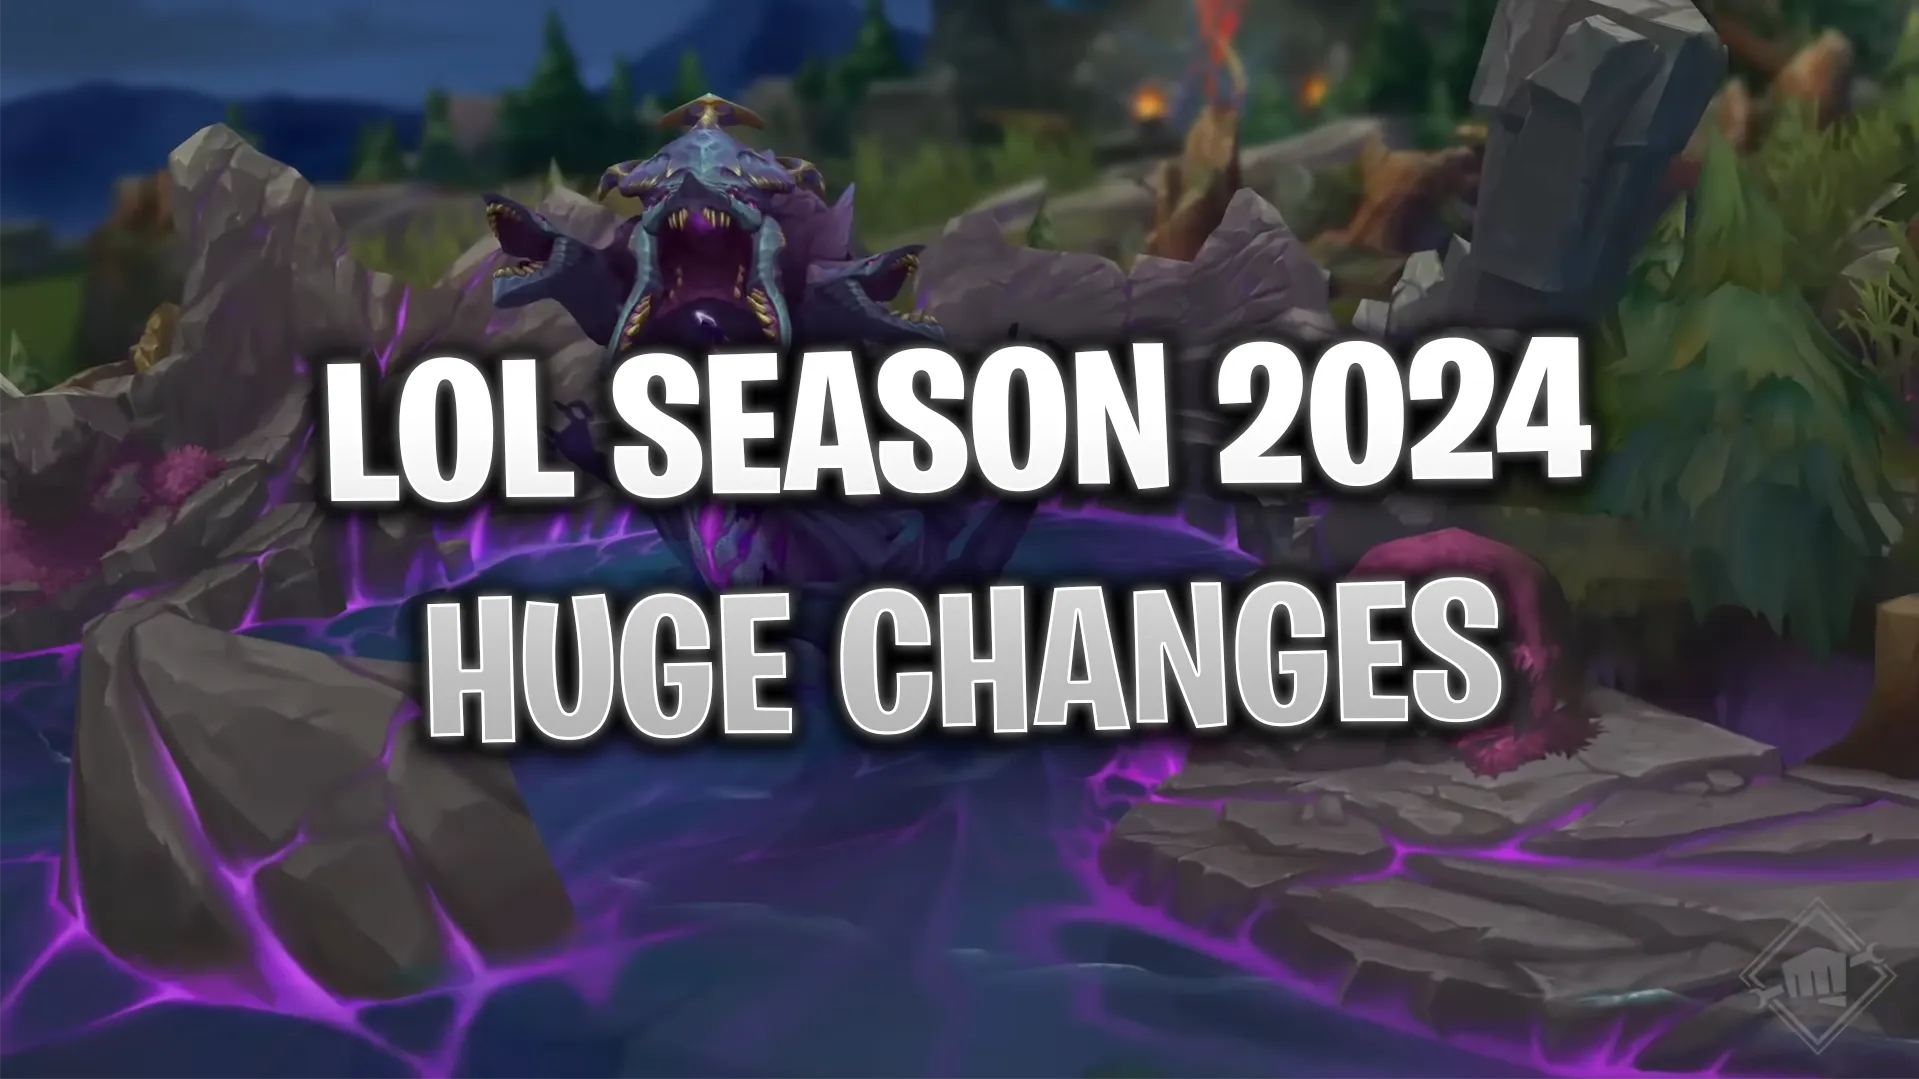 Riot teases new League of Legends champions coming in 2022 season - Polygon